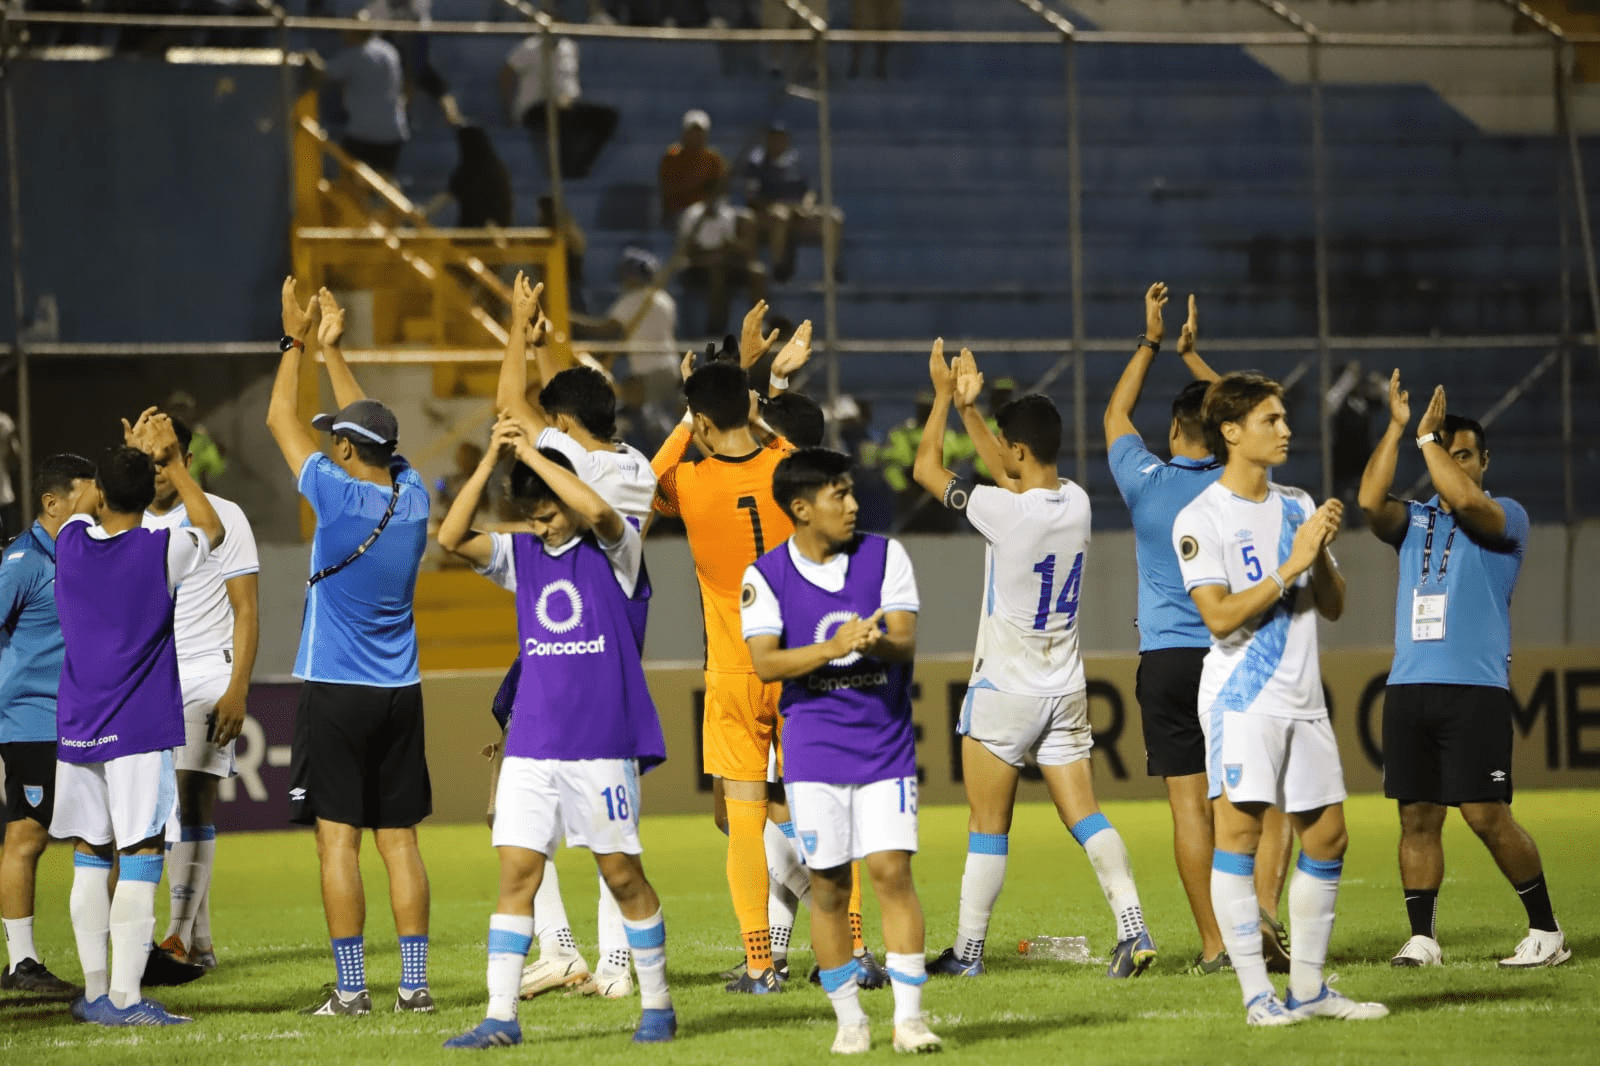 These are the official tournaments that the Guatemalan team U20 will participate in in 2023